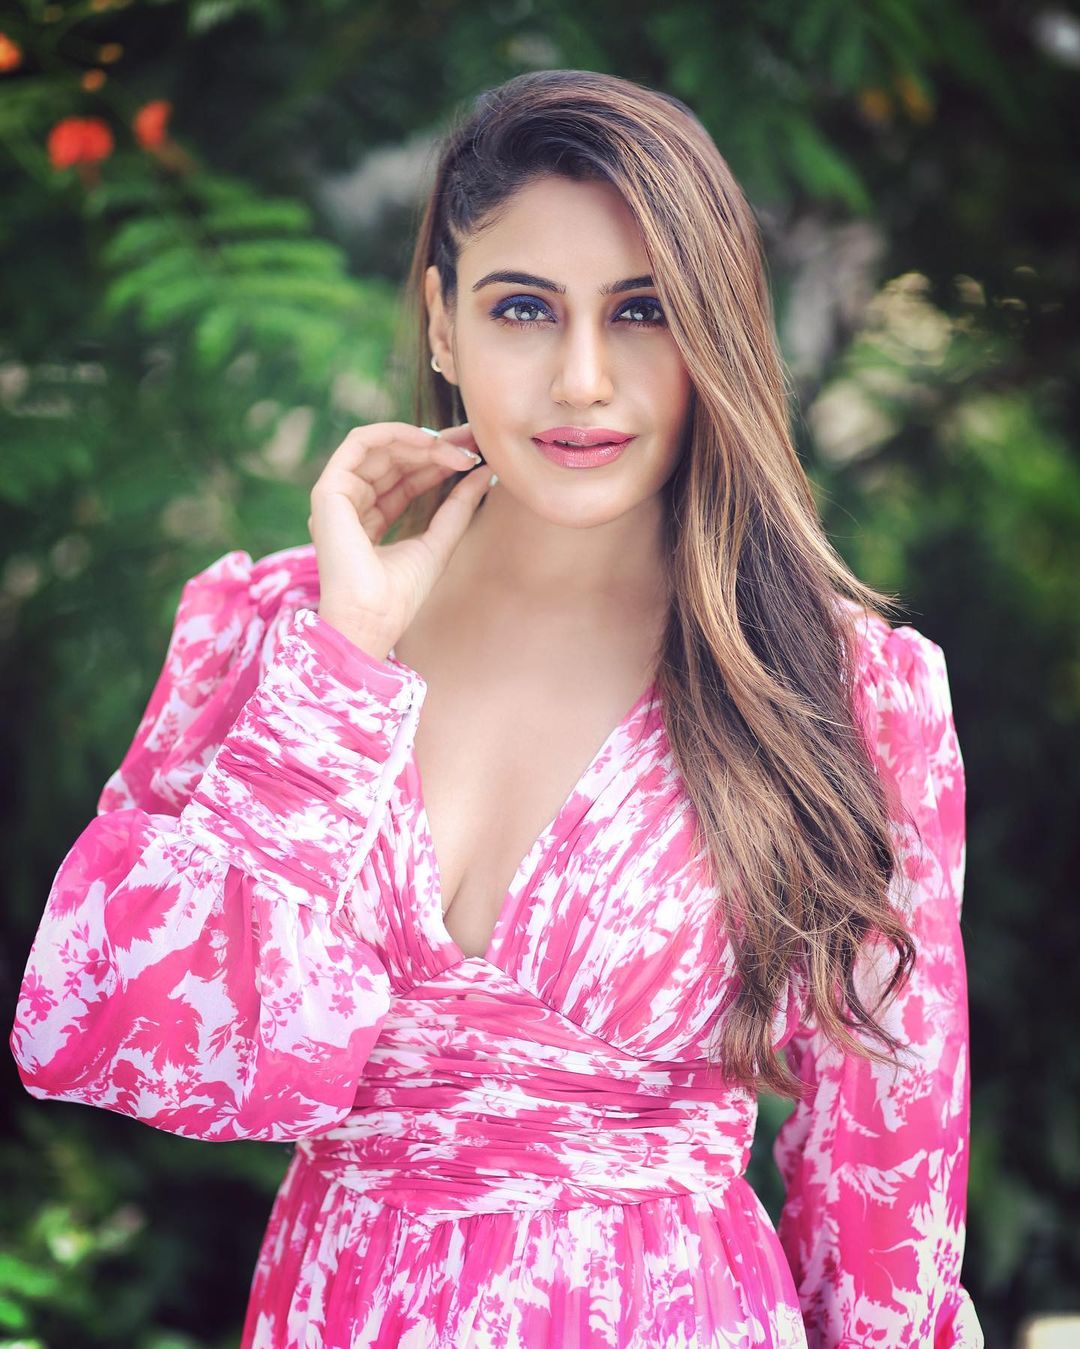  Surbhi Chandna looks sexy in the dress with the plunging neckline. We round up more such amazing pictures of the diva. (Image: Instagram)